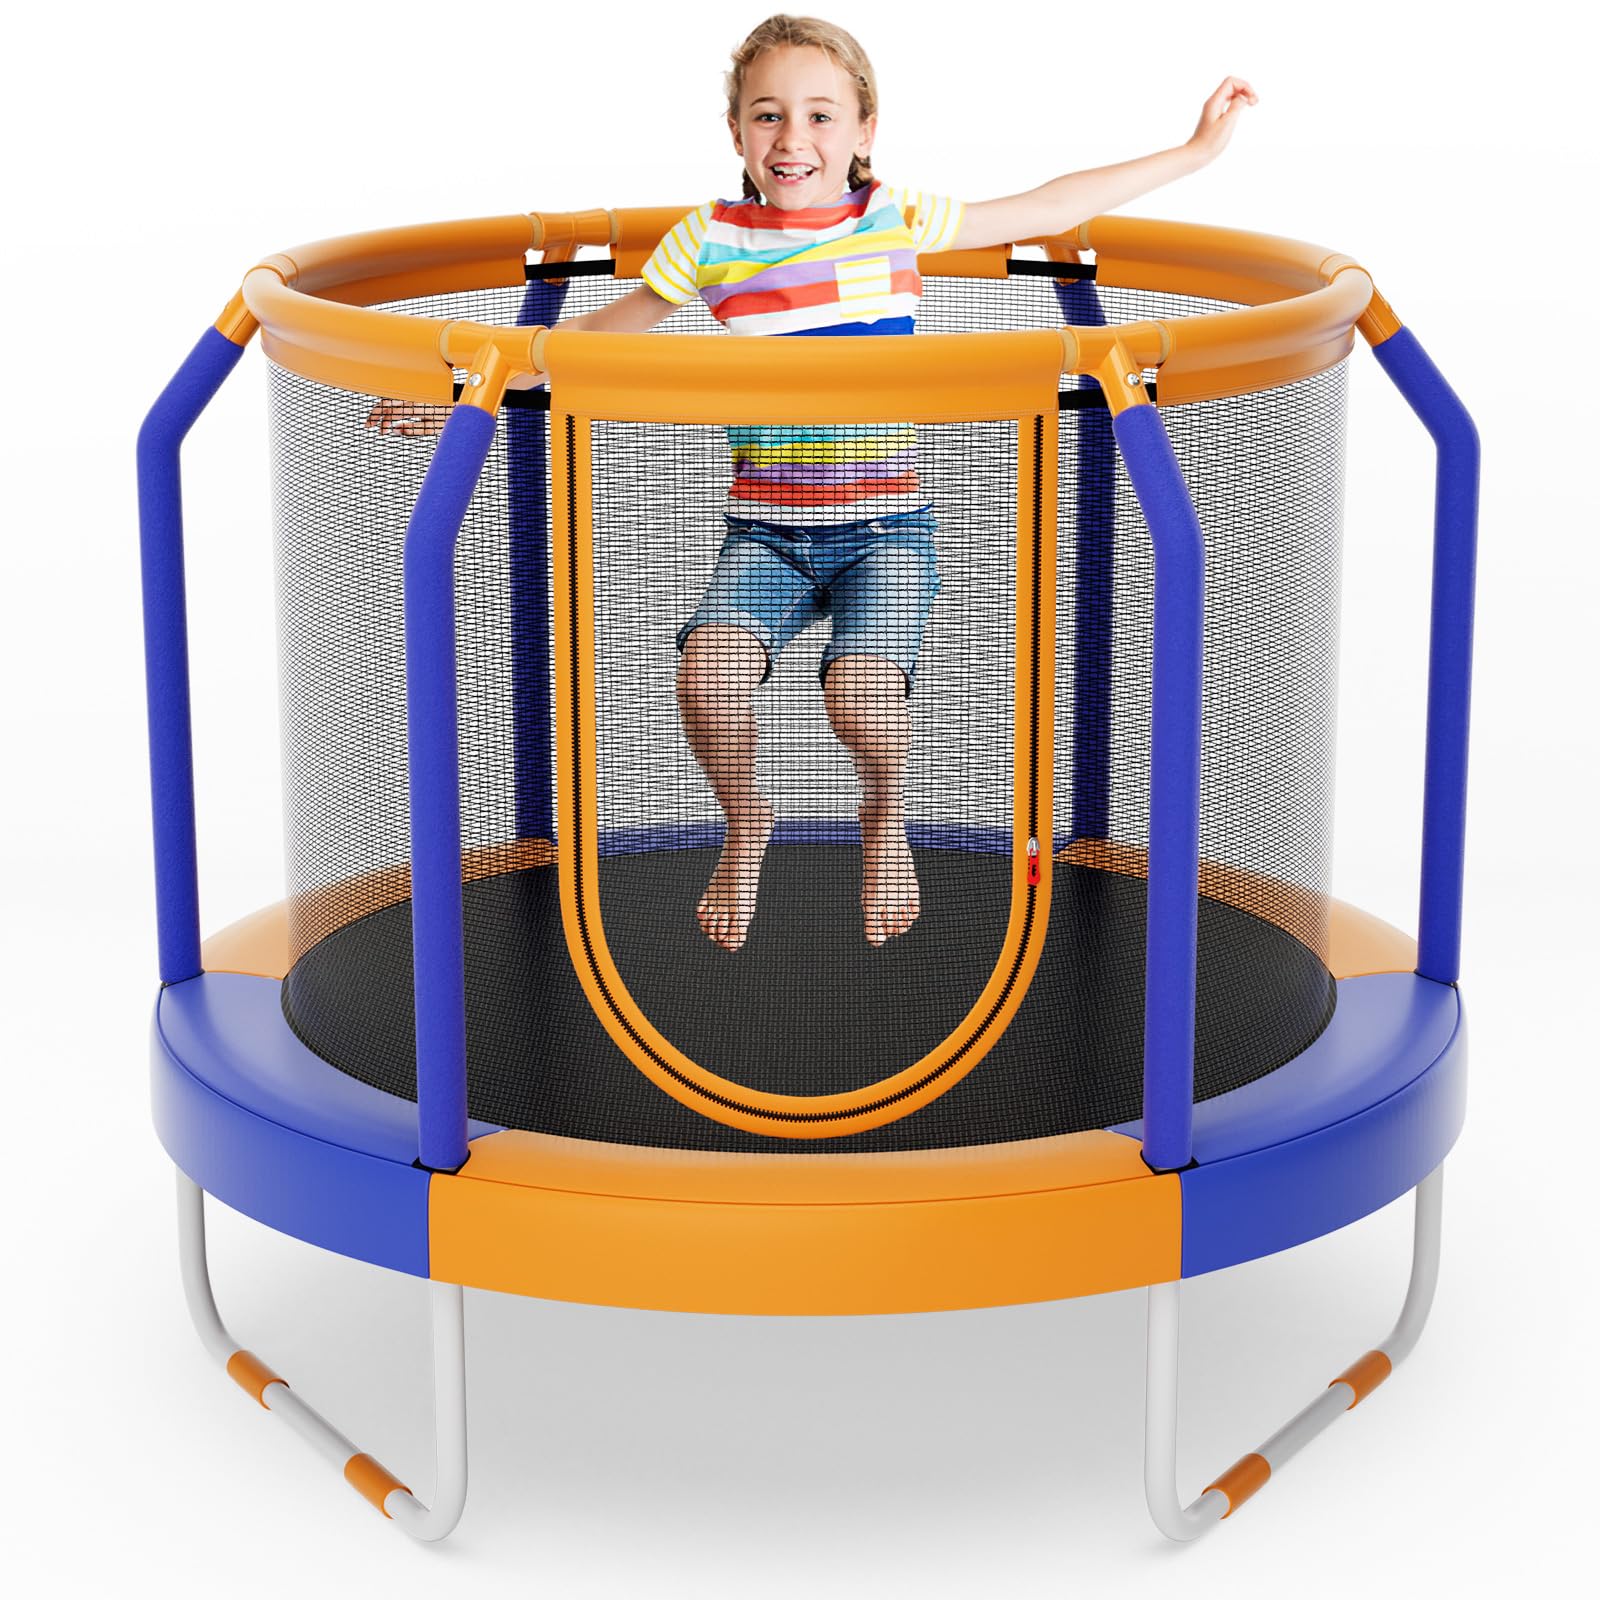 Giantex 48" Trampoline for Kids, Toddler Trampoline with Safety Enclosure Net, Max Load 265 Lbs